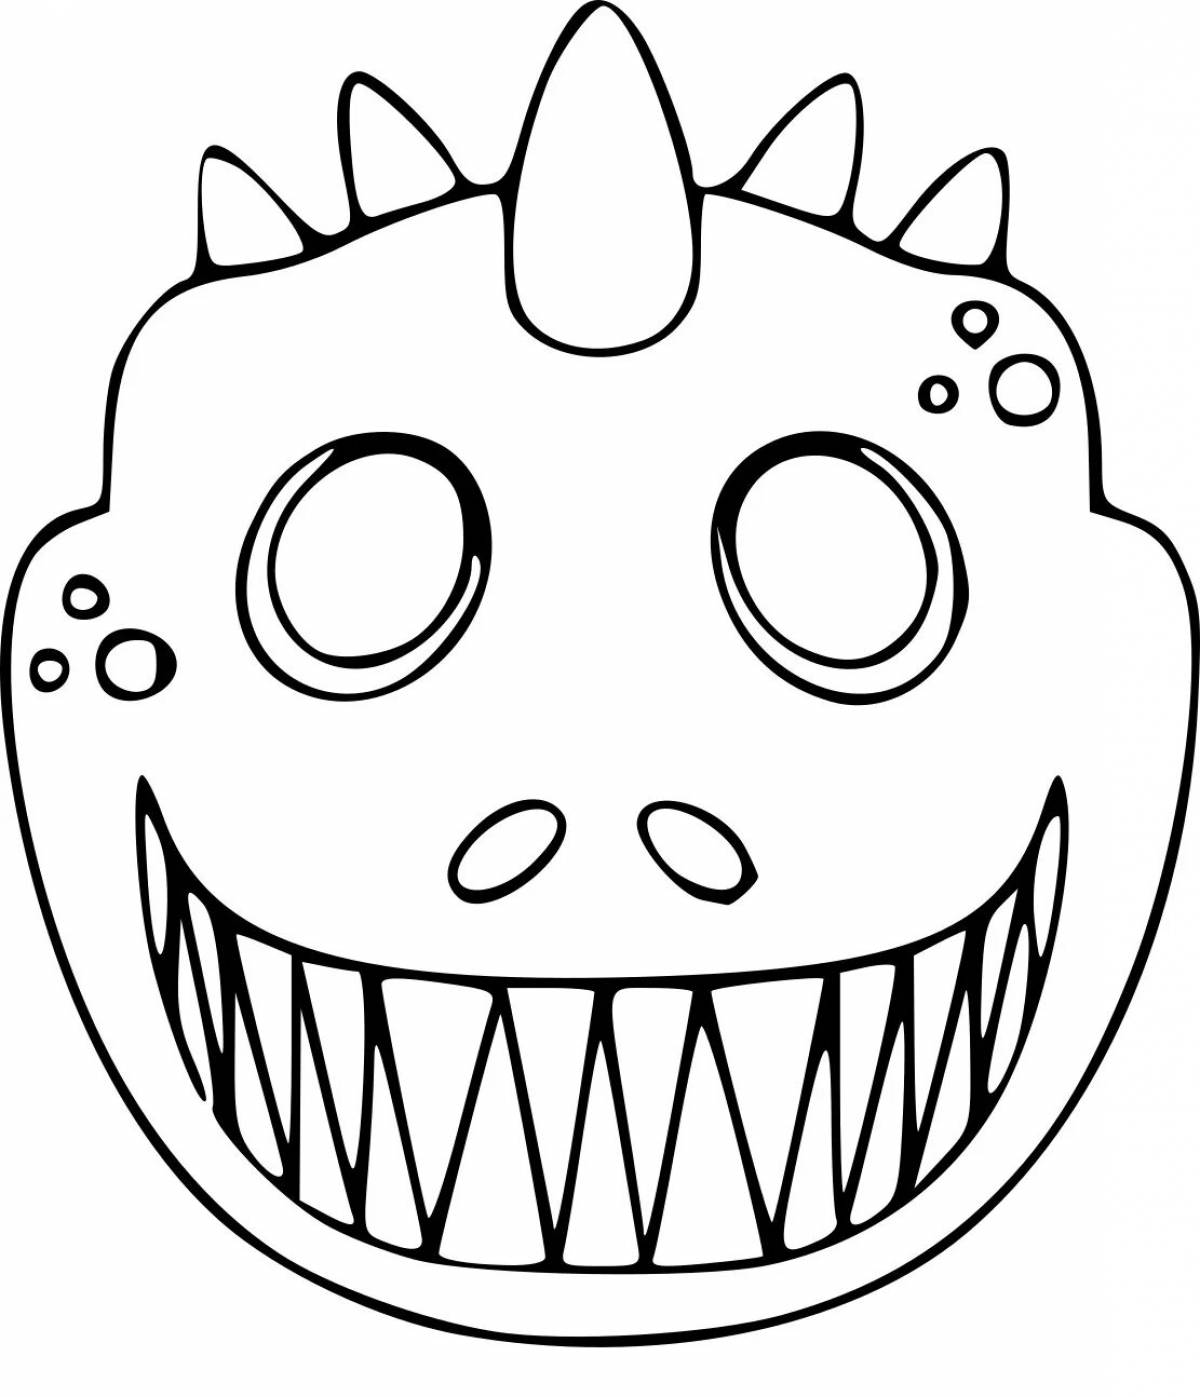 Great dinosaur mask coloring page